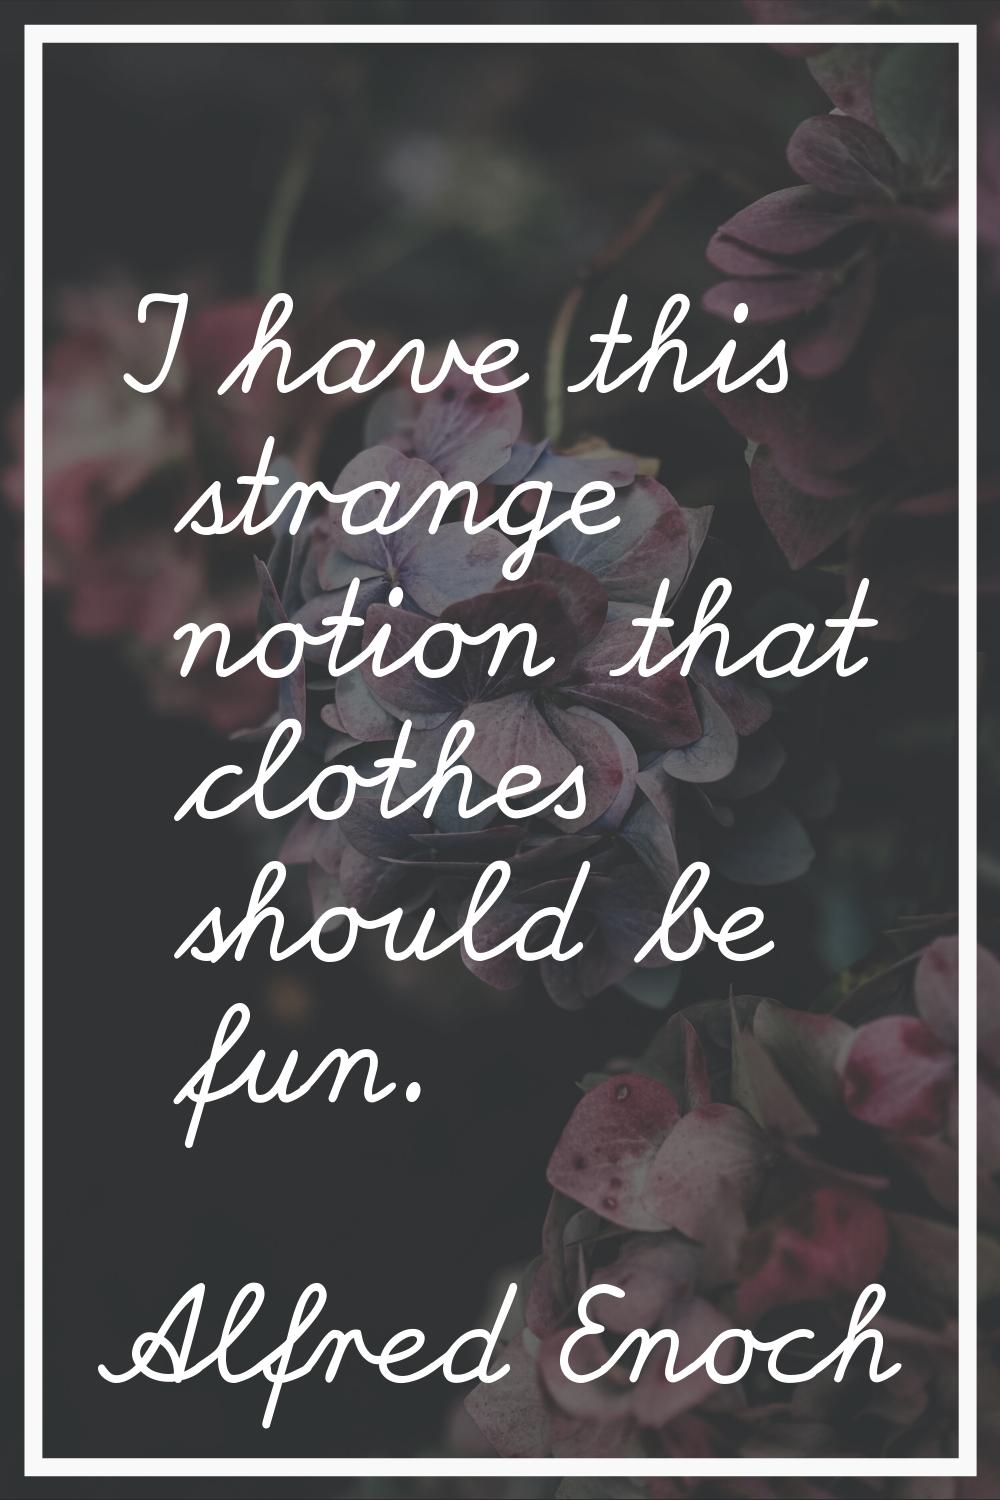 I have this strange notion that clothes should be fun.